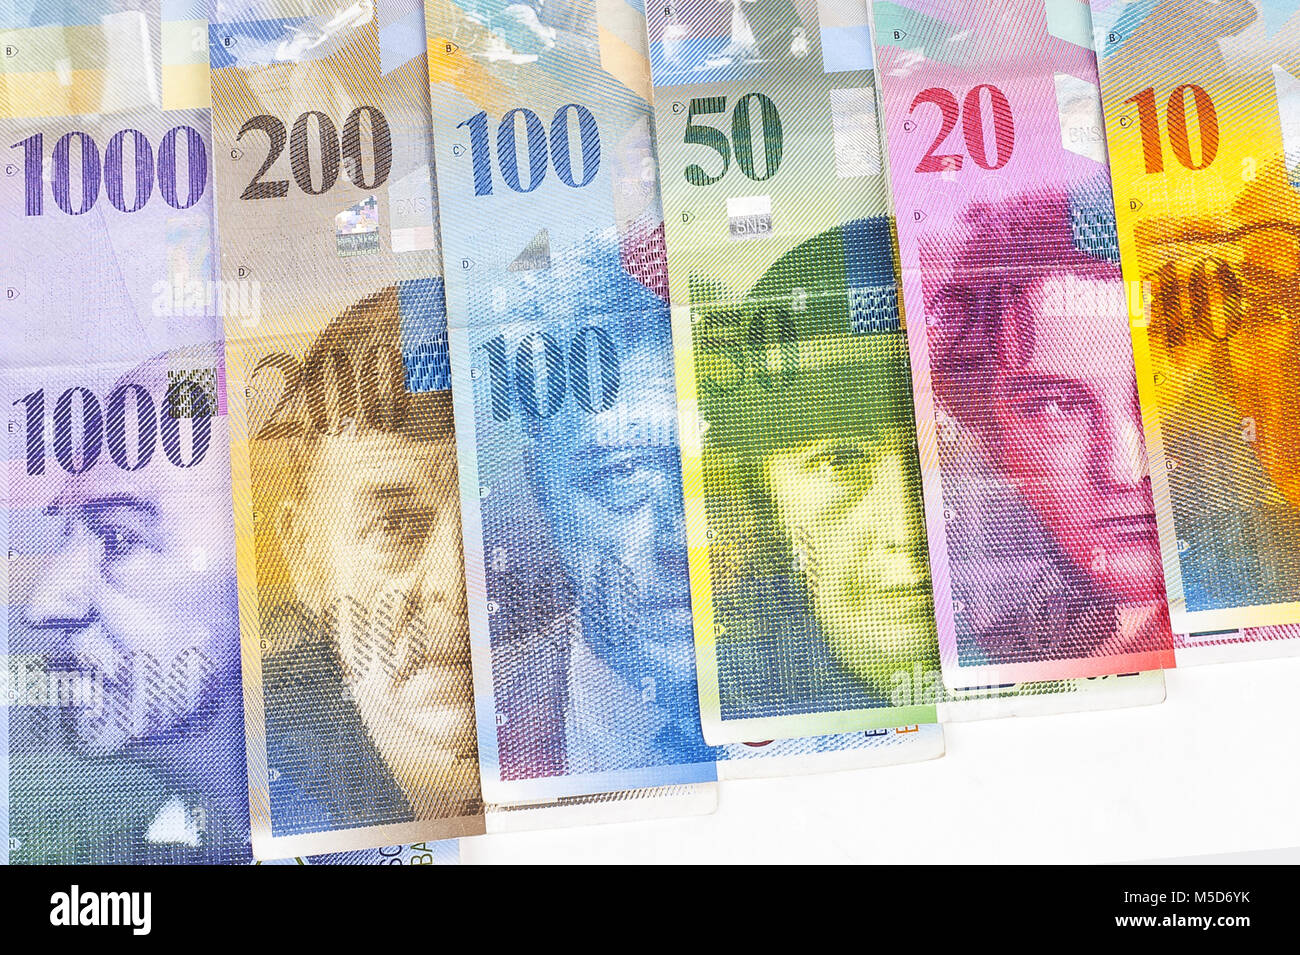 swiss-francs-money-and-currency-of-switzerland-stock-photo-alamy